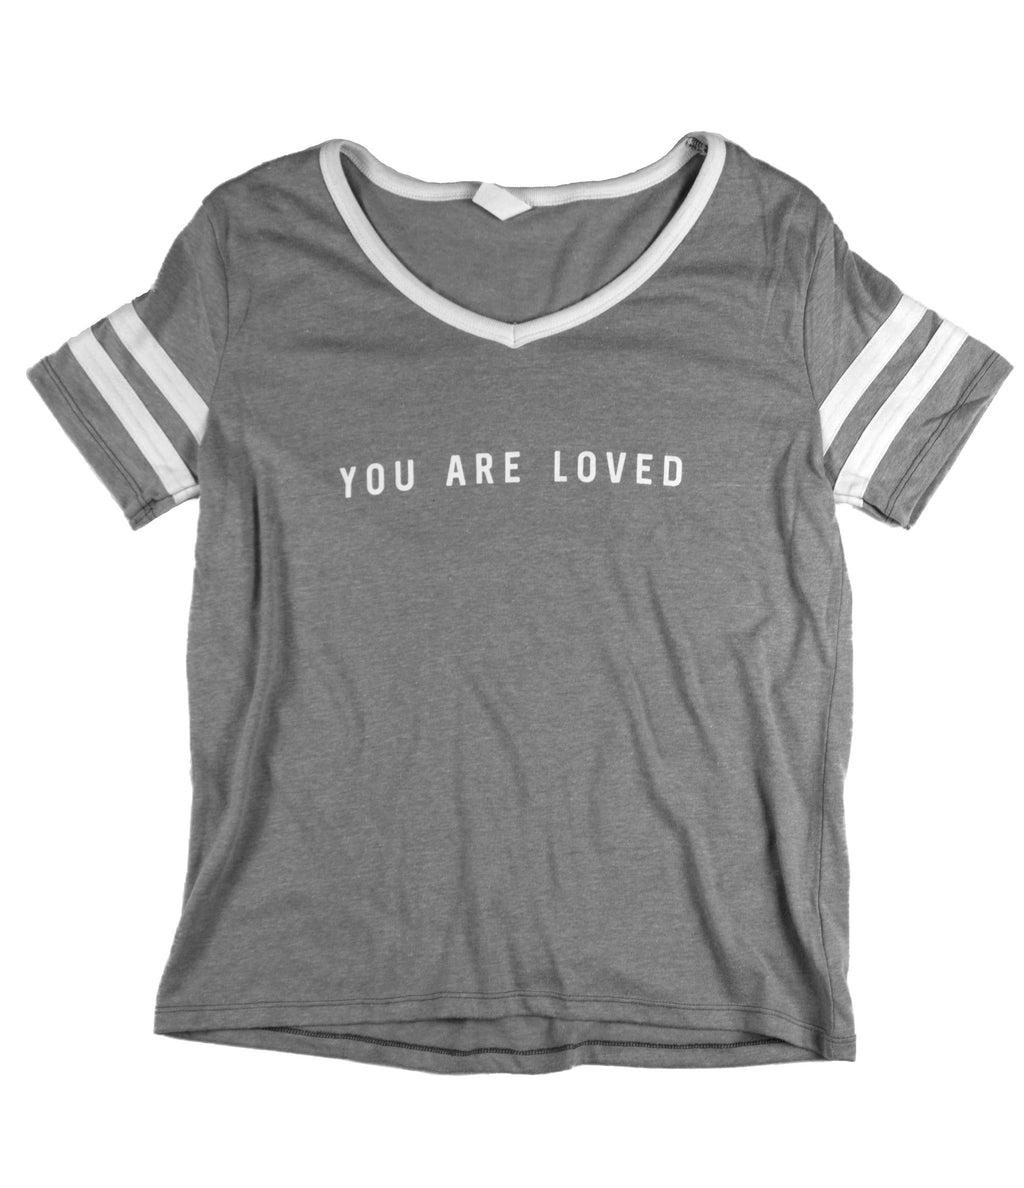 YOU ARE LOVED GREY/WHITE WOMEN'S VARSITY LOOSE FIT T-SHIRT